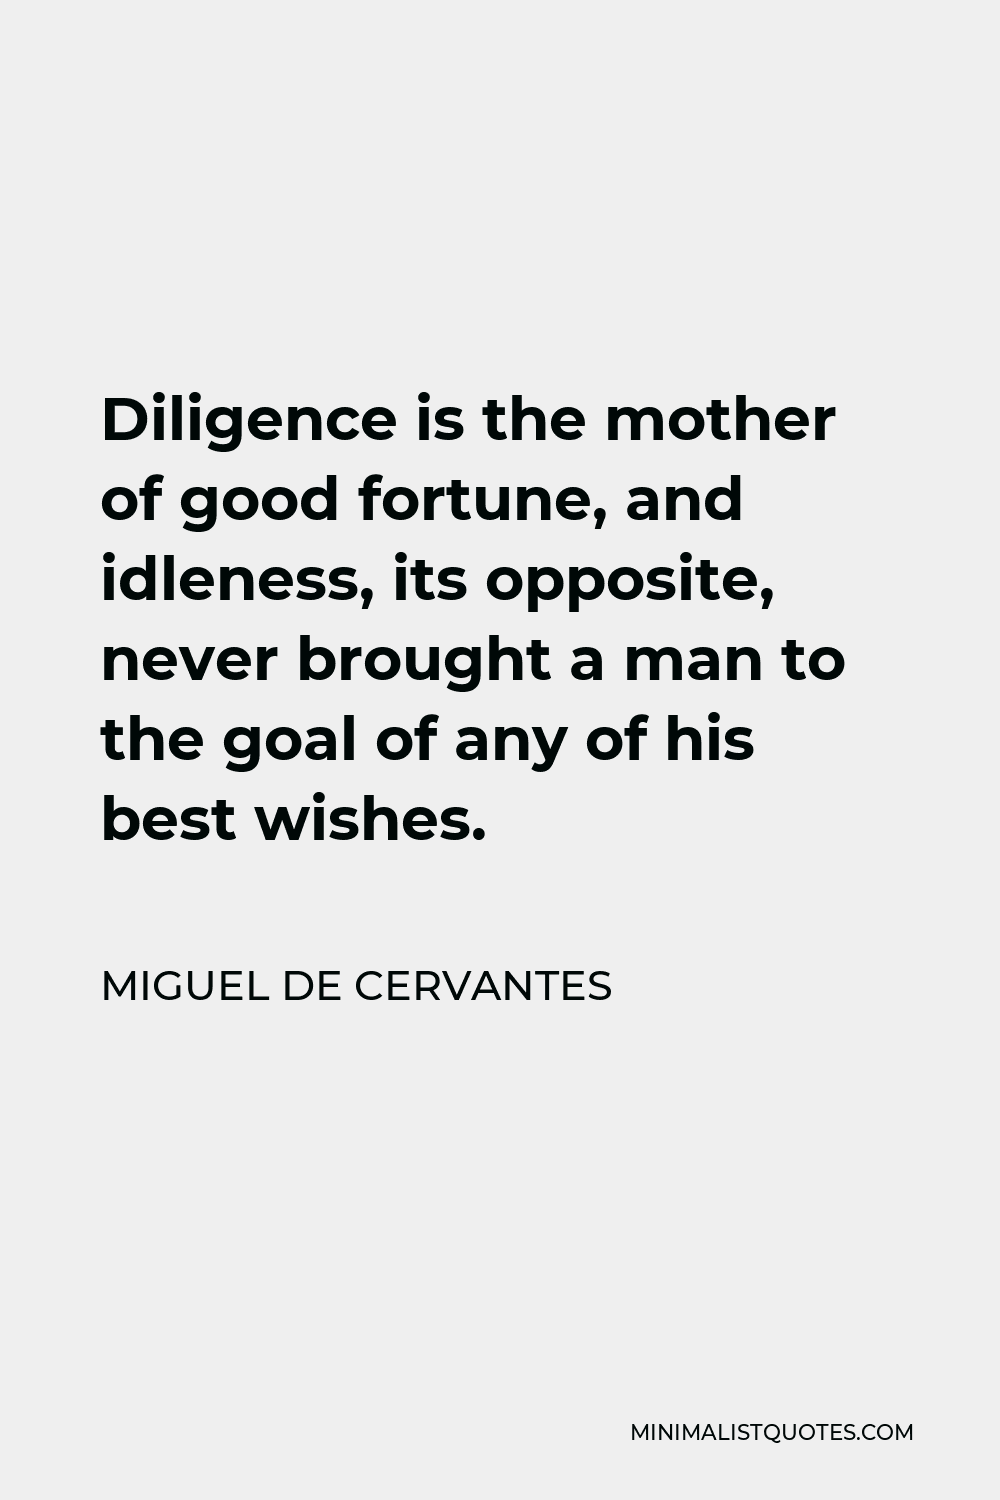 Miguel de Cervantes Quote - Diligence is the mother of good fortune, and idleness, its opposite, never brought a man to the goal of any of his best wishes.